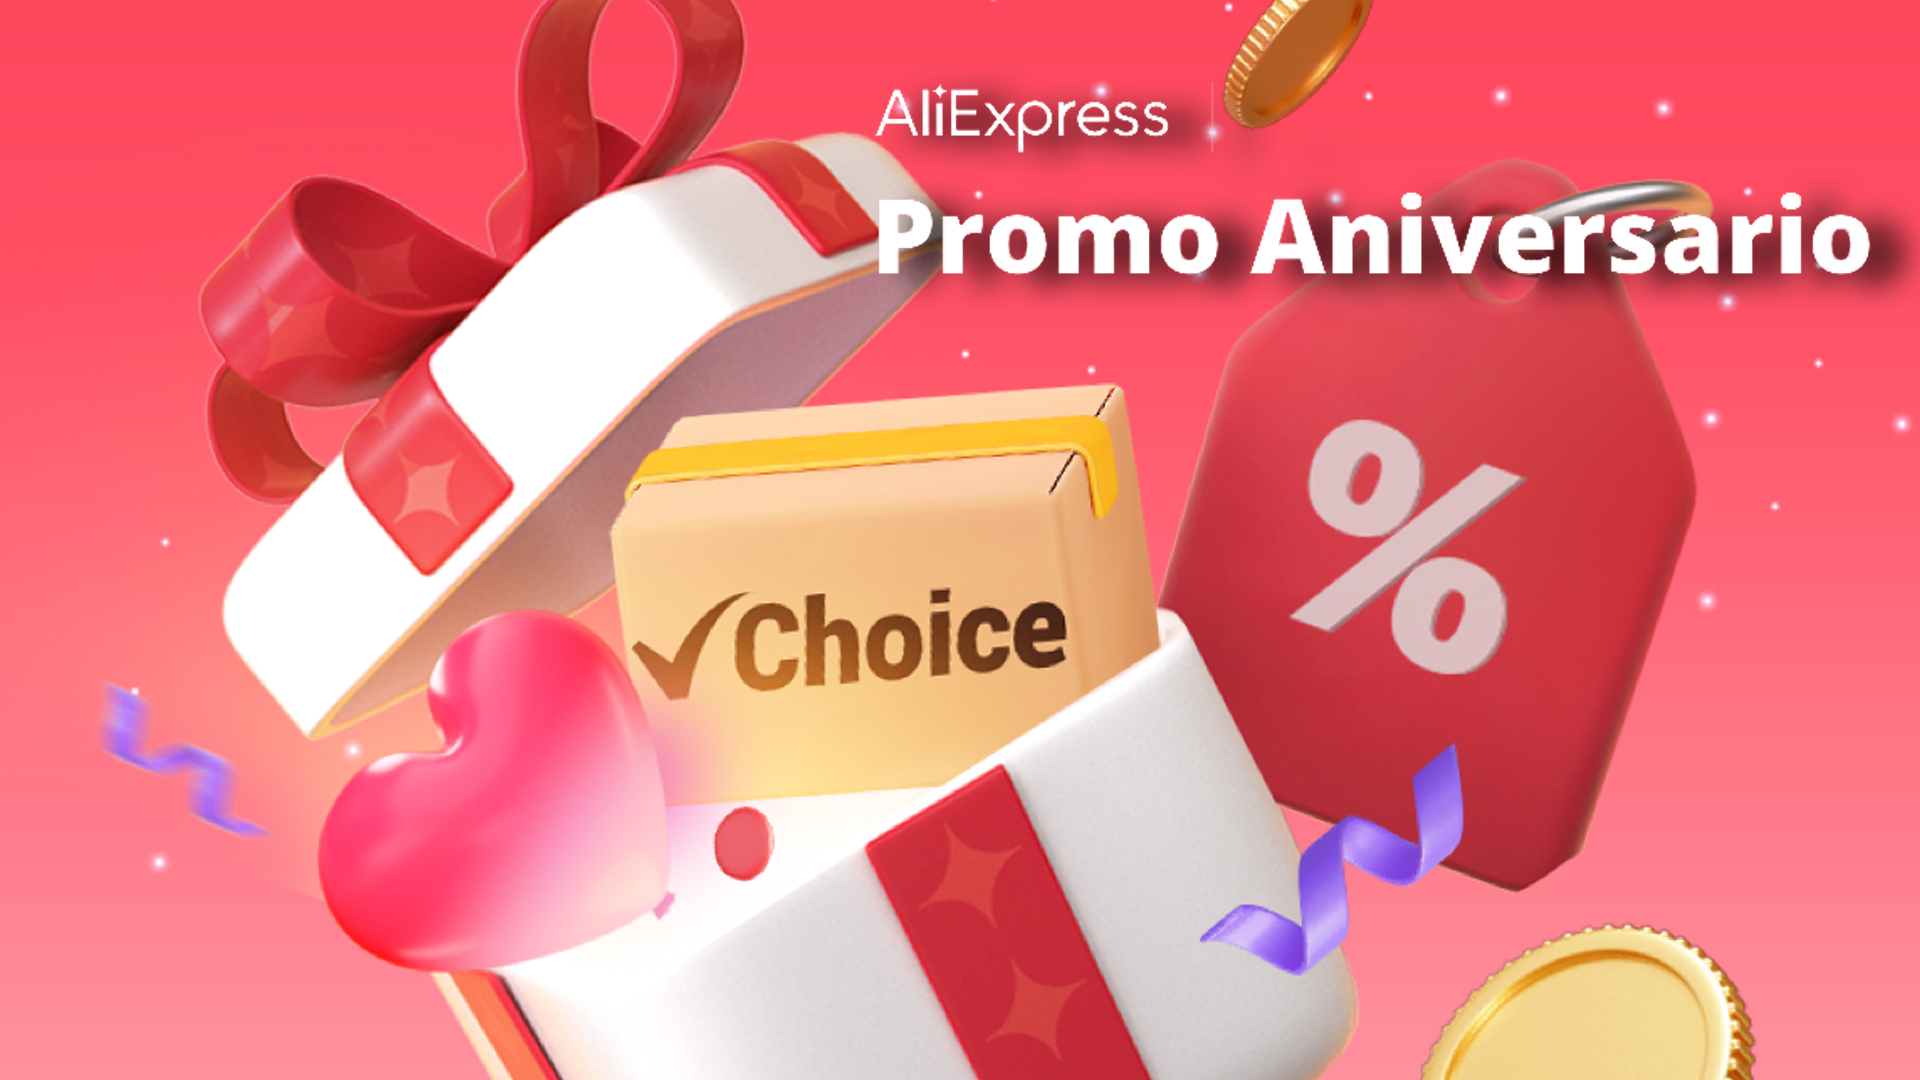 You will not believe everything that AliExpress offers us for the  Anniversary Promo - Gearrice